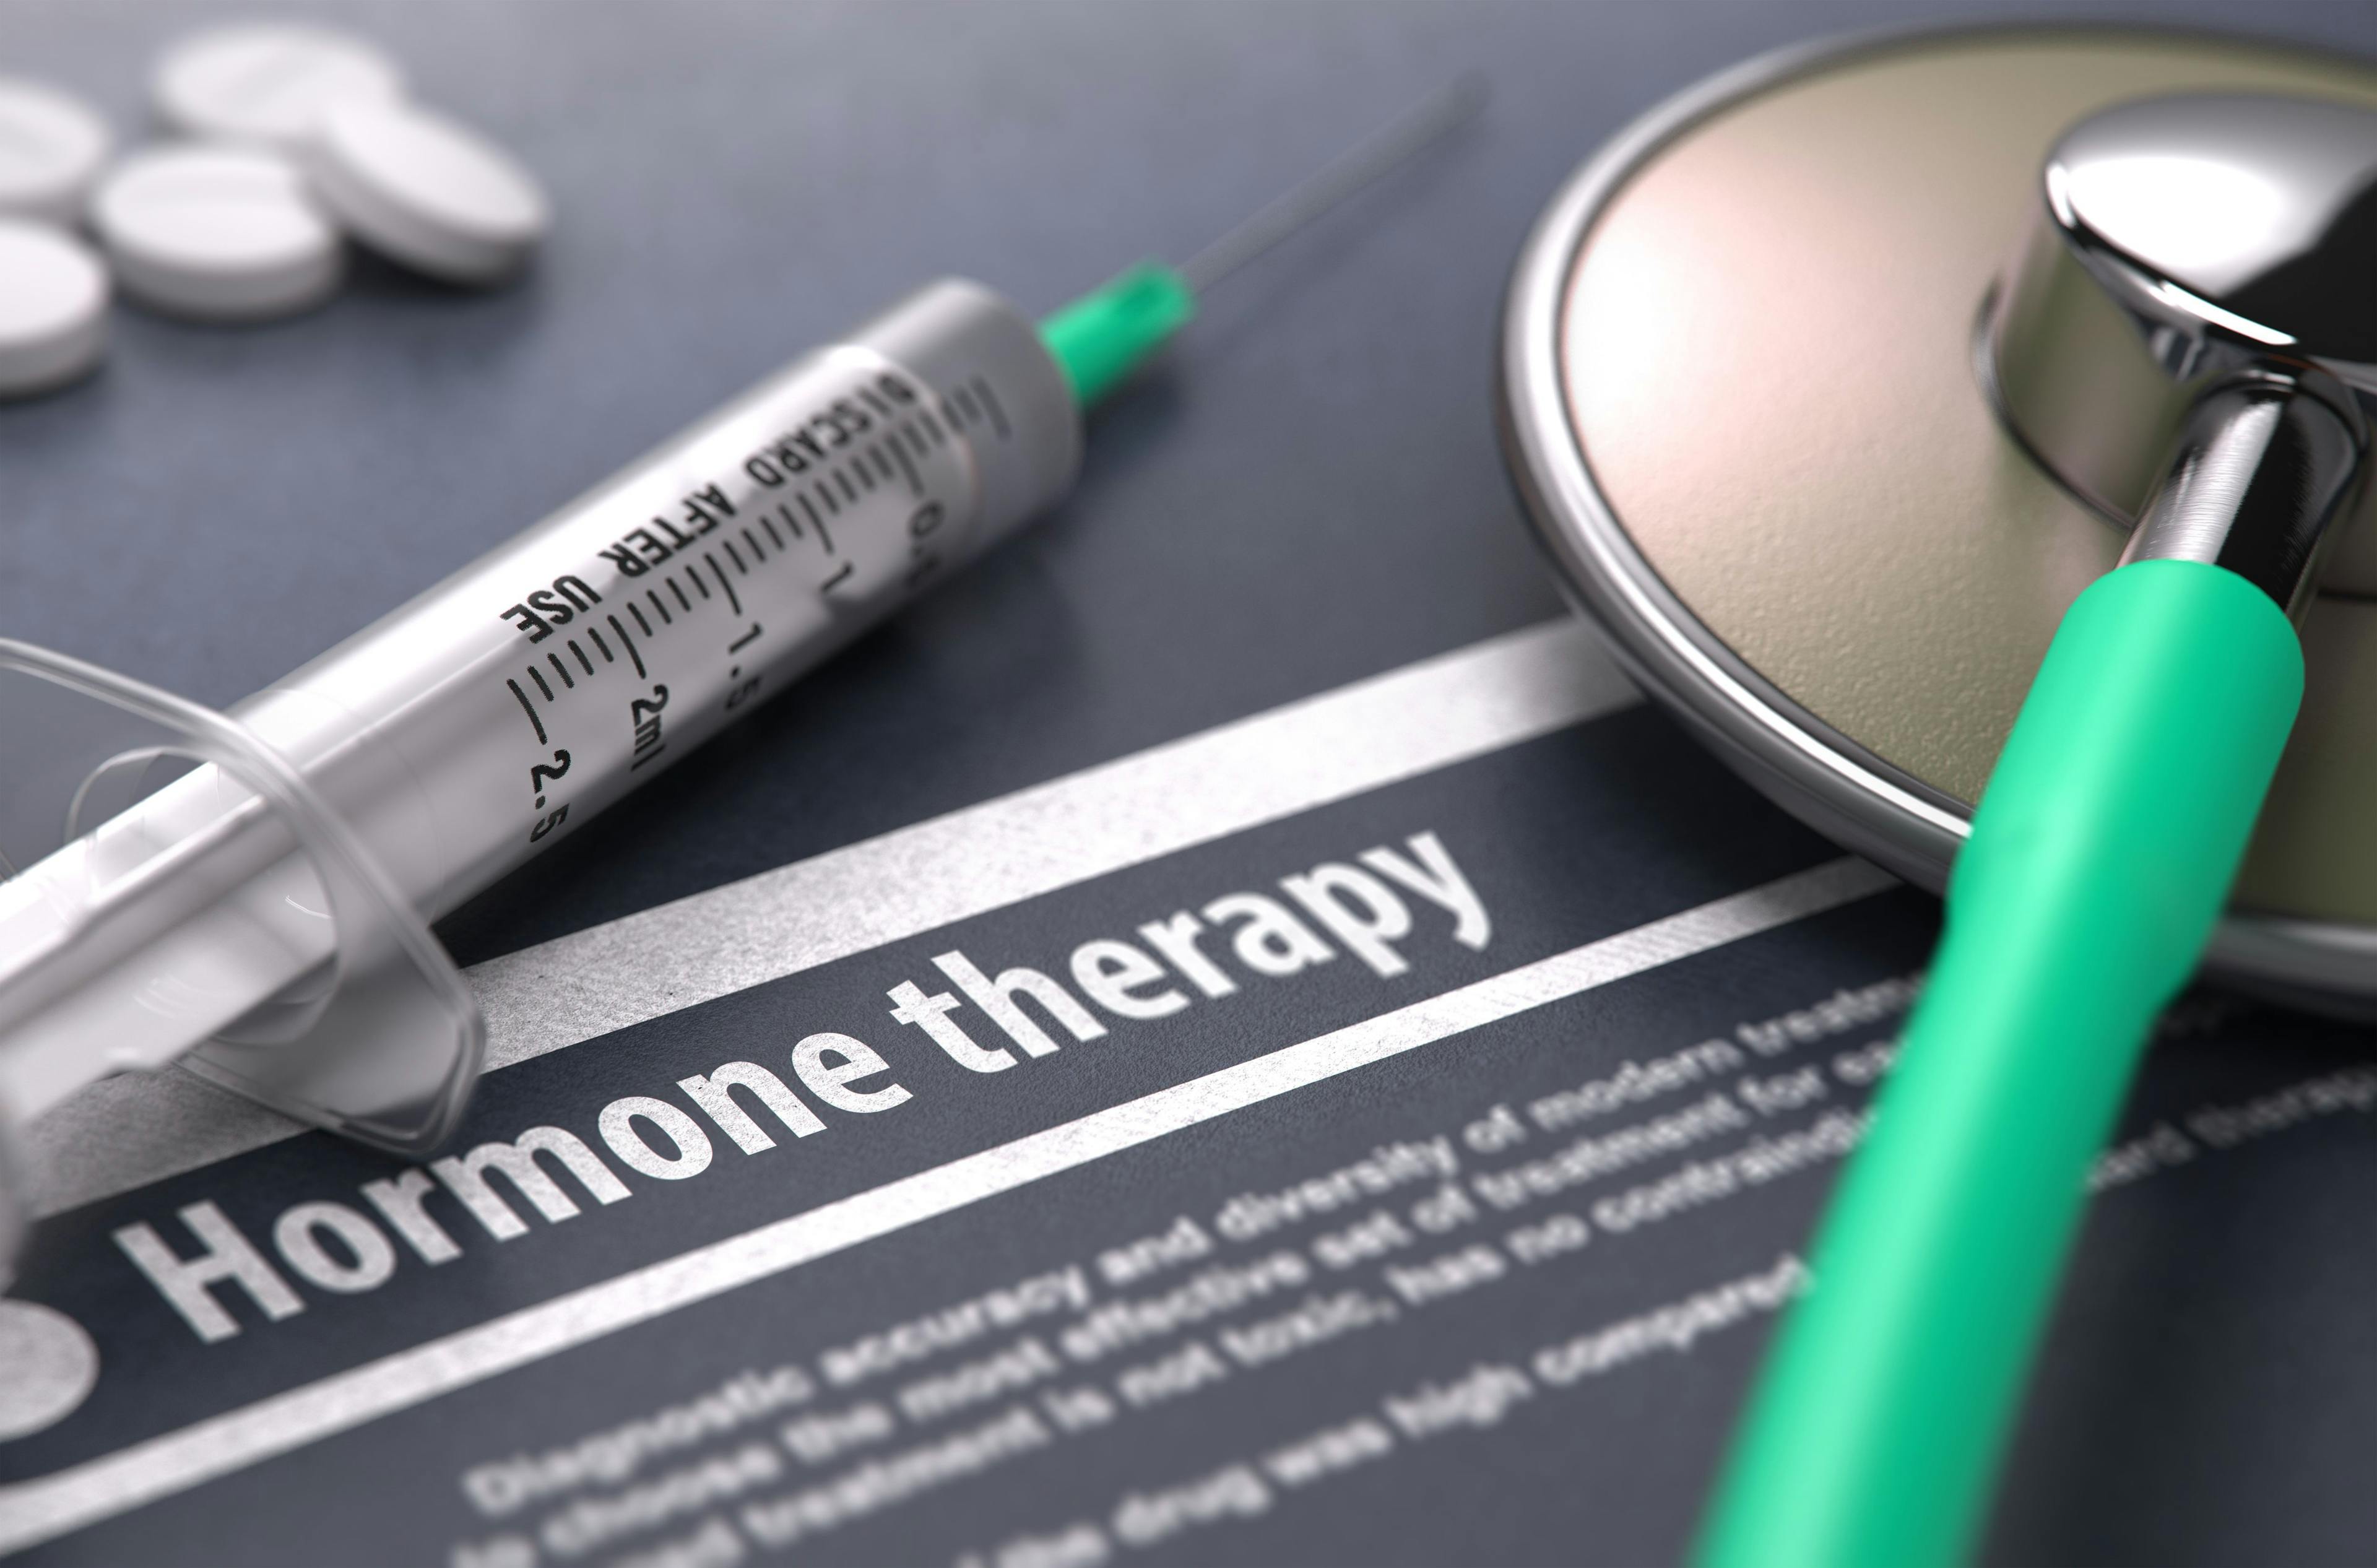 Hormone therapy for postmenopausal women with nocturia